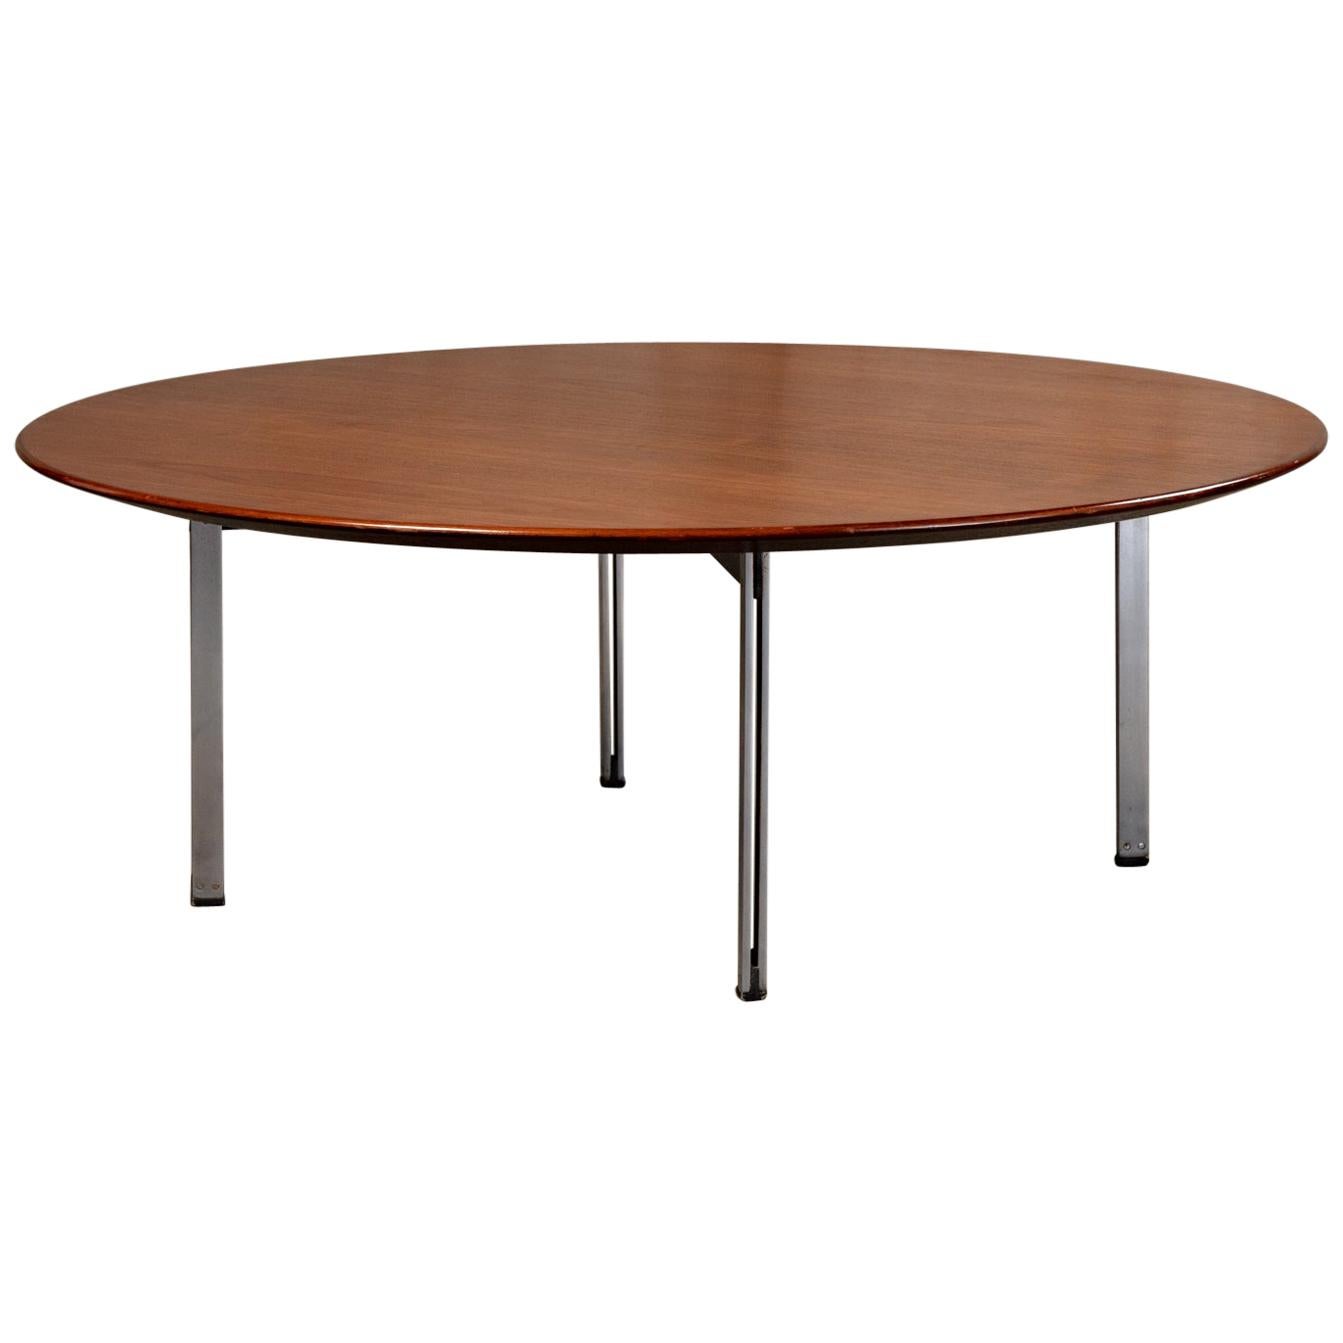 Table basse ronde basse